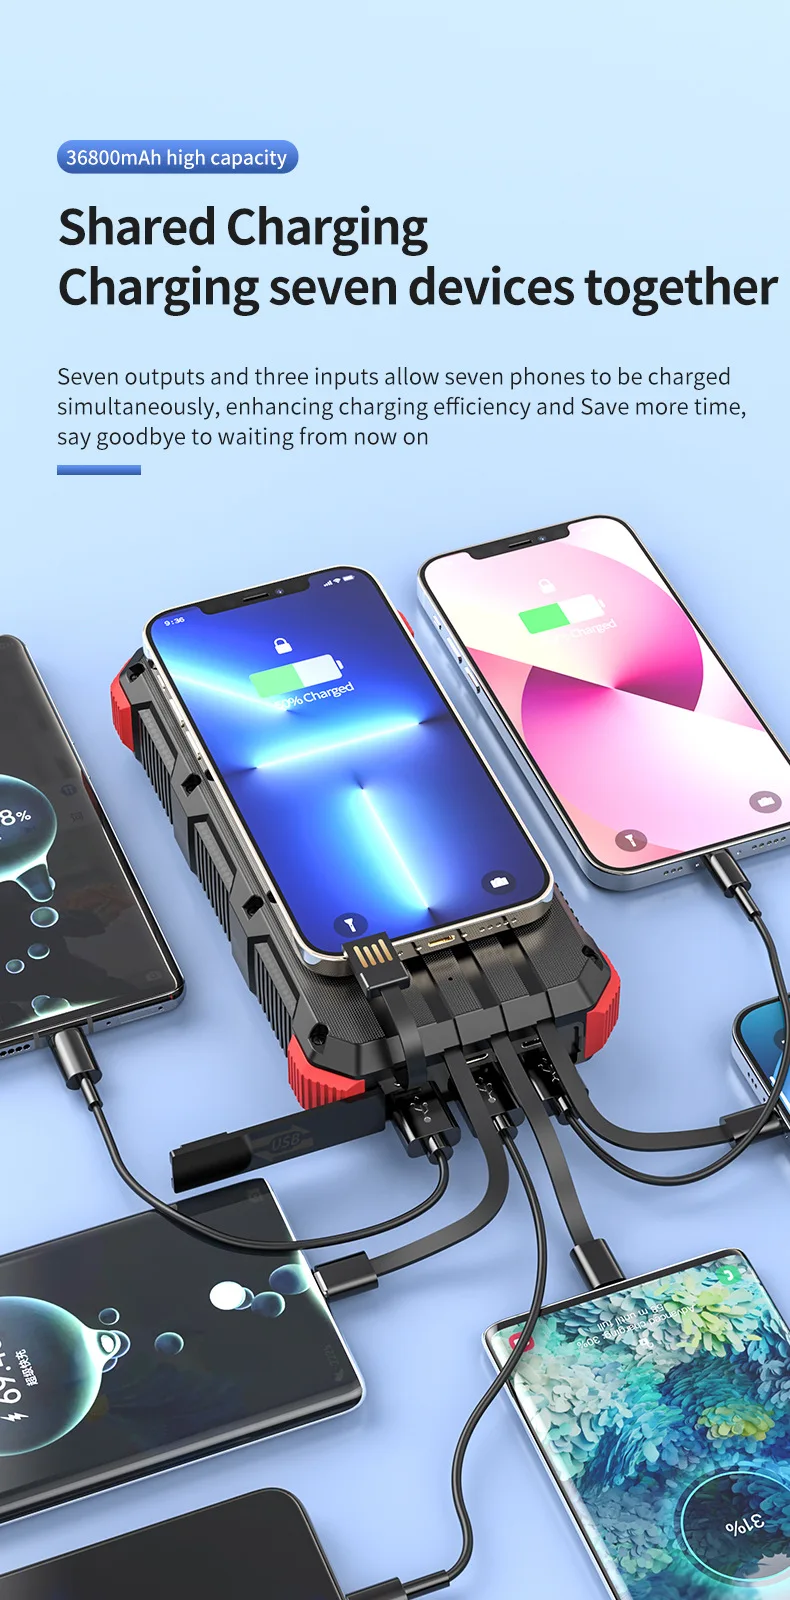 Efficient and Reliable 36800mAh Portable Wireless Quick Charger - Never Run Out of Power Again10